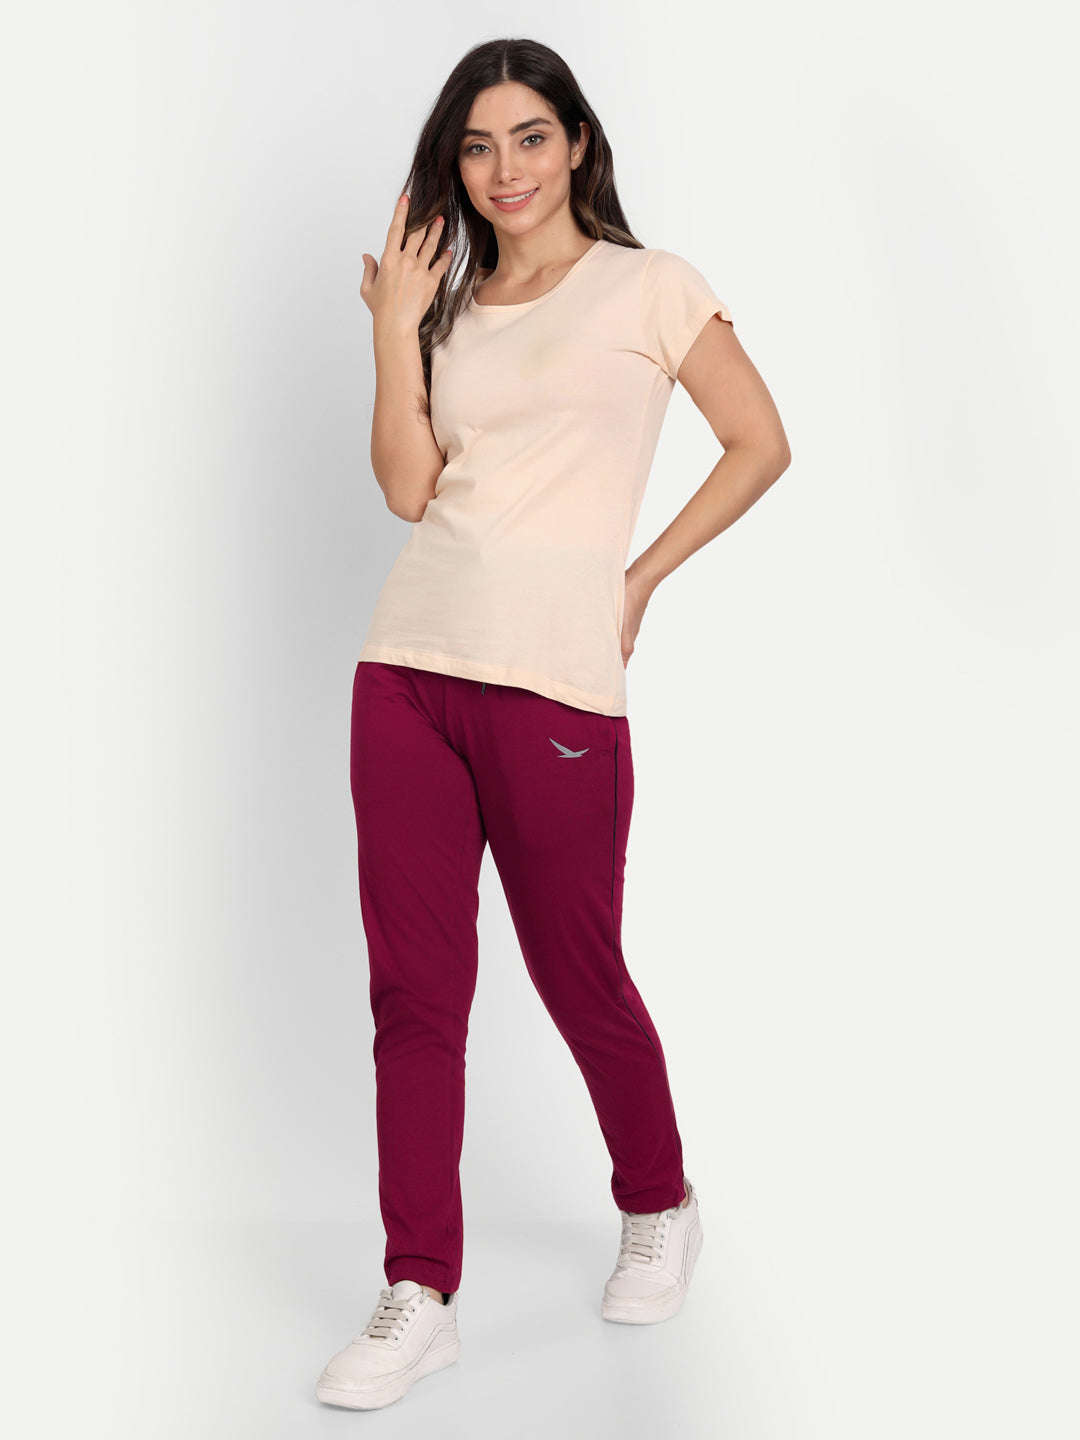 Lyra Women's Track Pants Track_302_PK_S_Pink_S : Amazon.in: Fashion